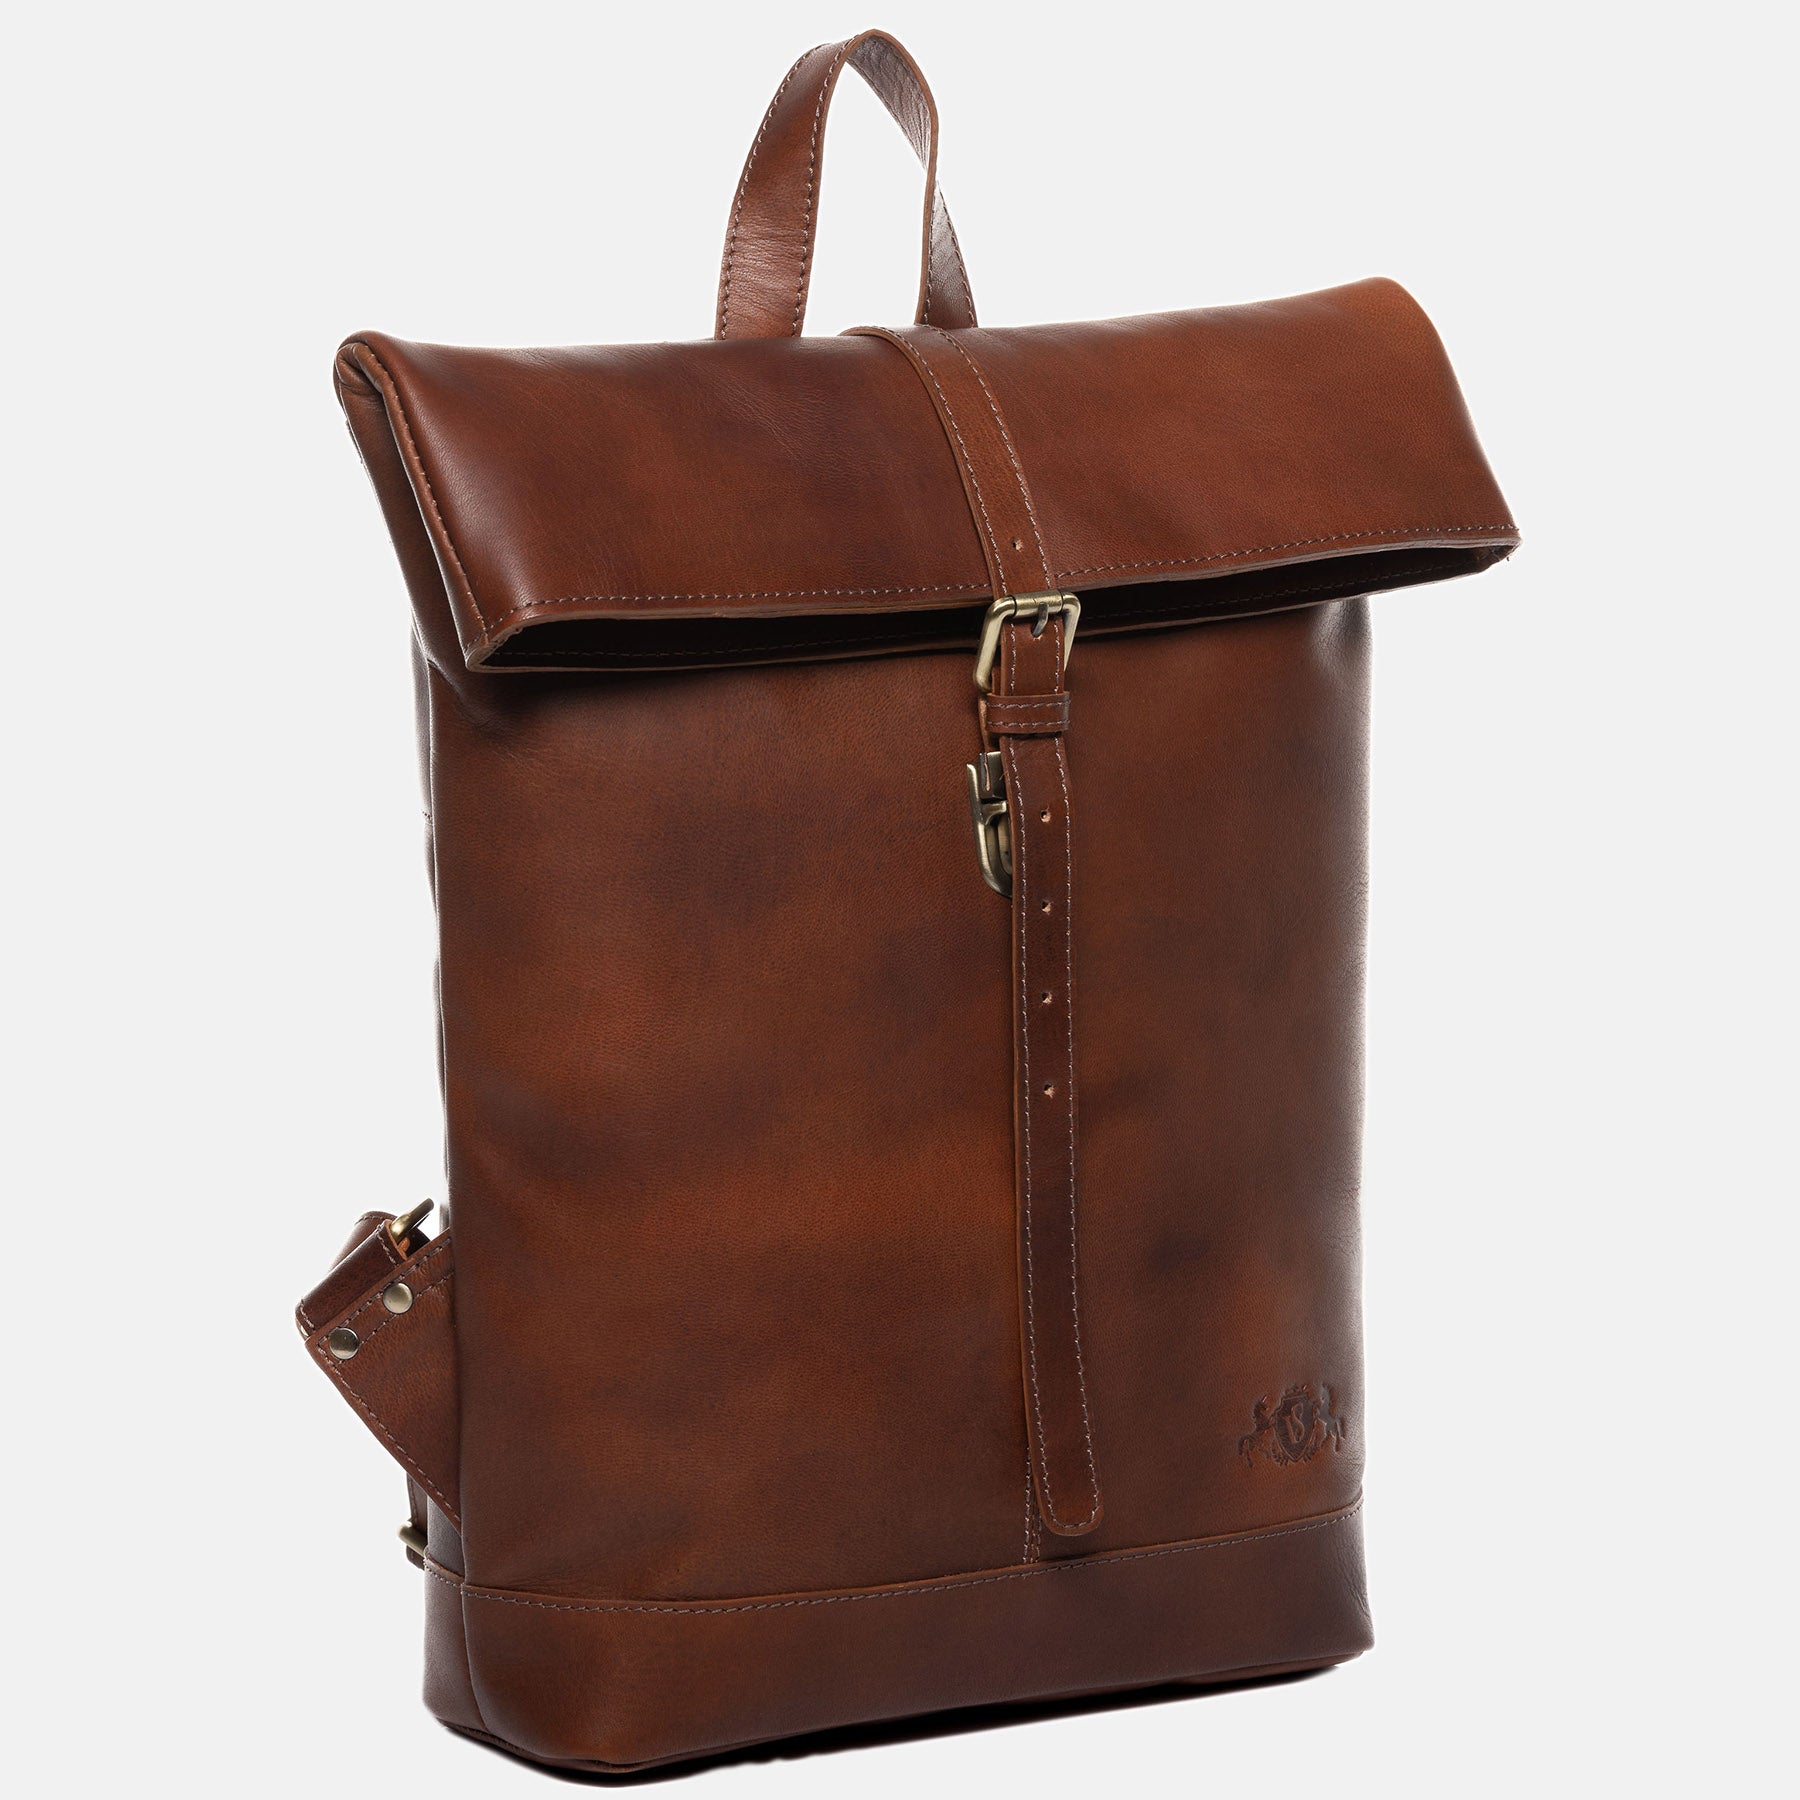 Rolltop backpack JAY smooth leather light brown